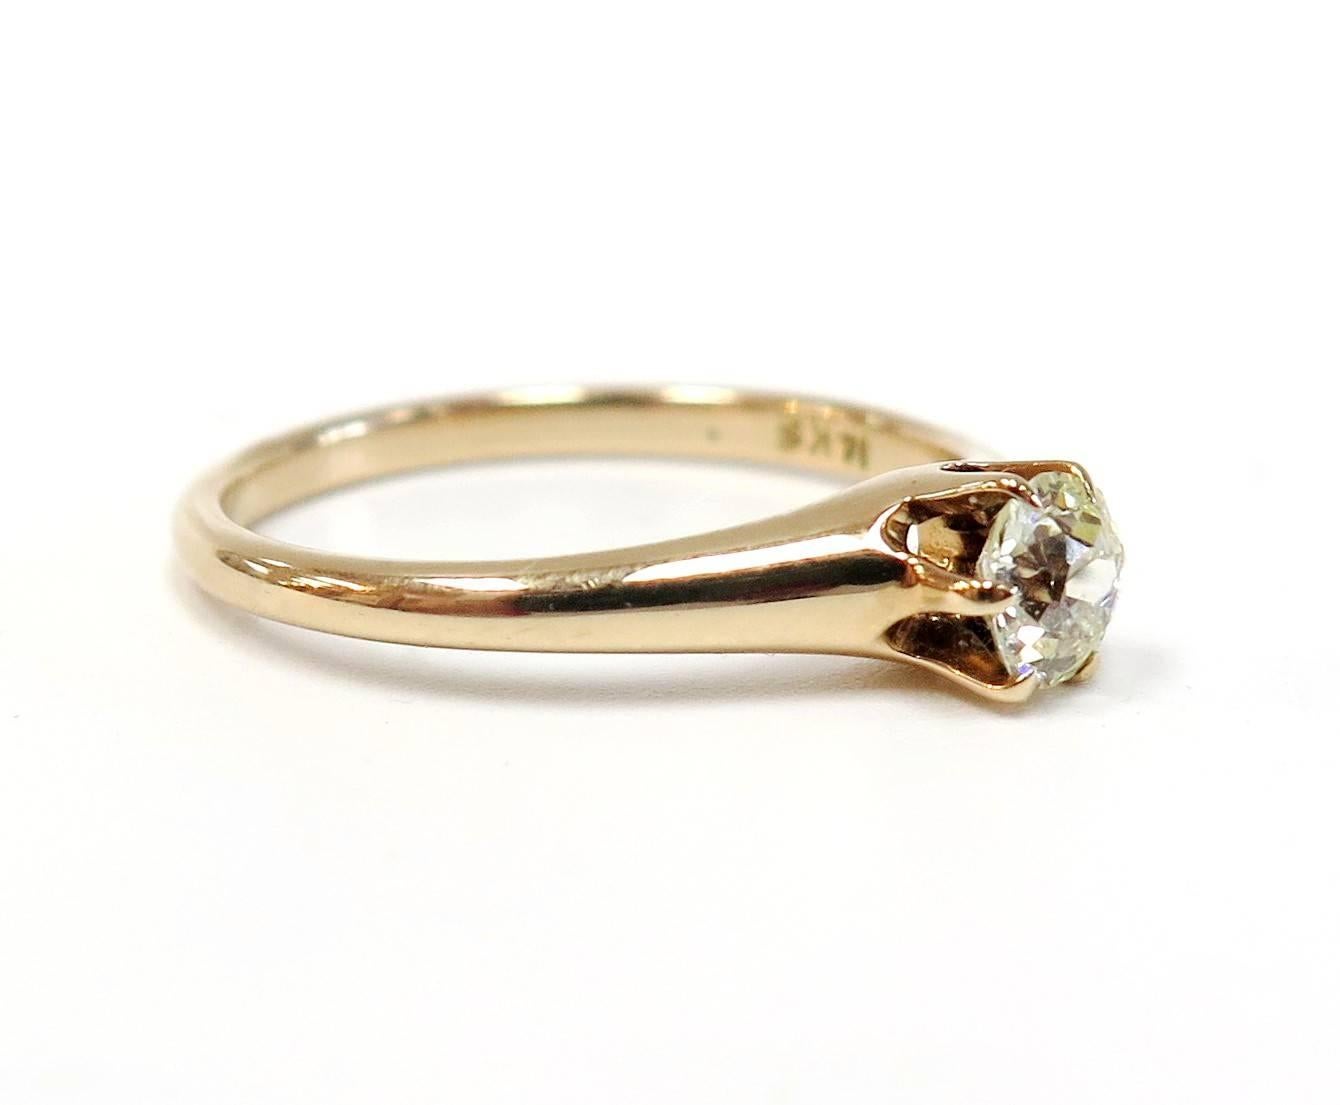 Understated elegance with extreme sparkle!

Rare 1940's 14 karat Rose Gold Engagement Ring has exceptional sparkle!

Old European Cut Diamond: 0.34 carat, Color: J-K (Color much whiter in person), Clarity: VS

Size 7 - we can size it for you.